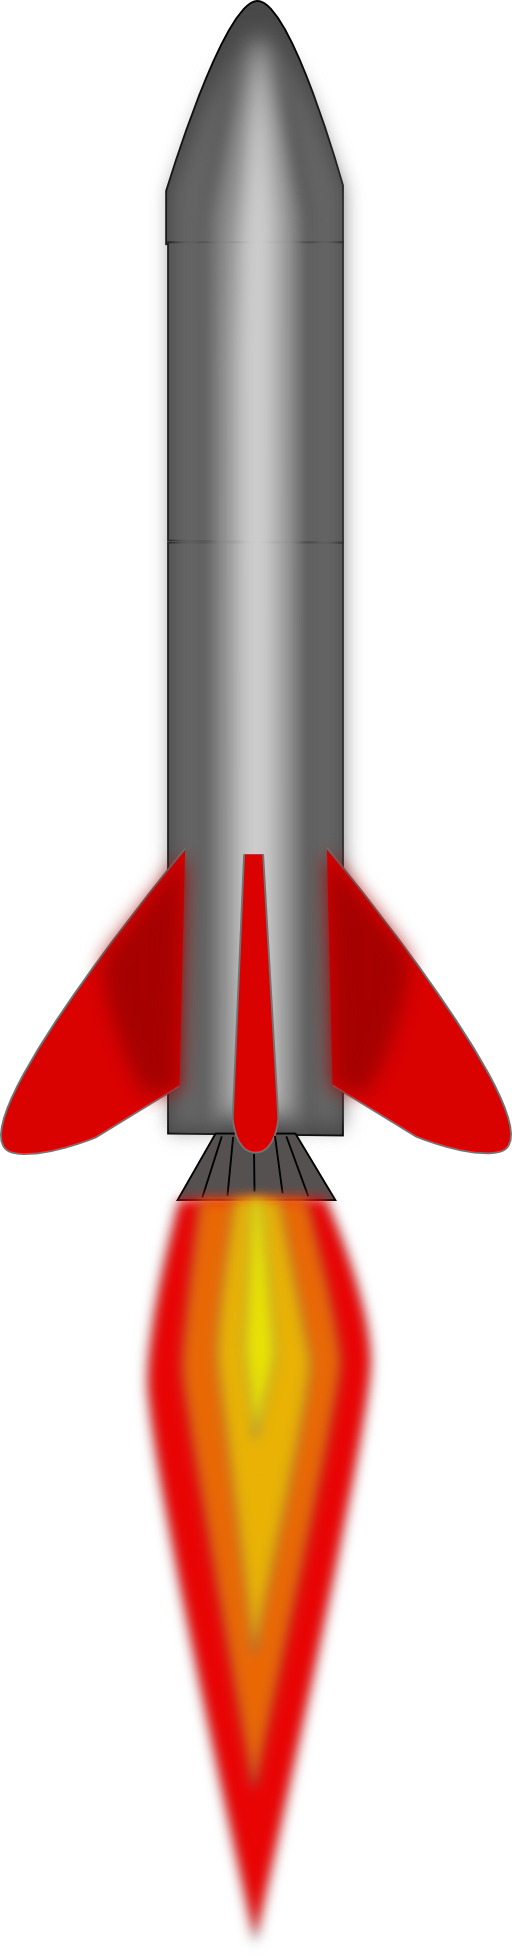 Rocket booster clip art clipart images gallery for free